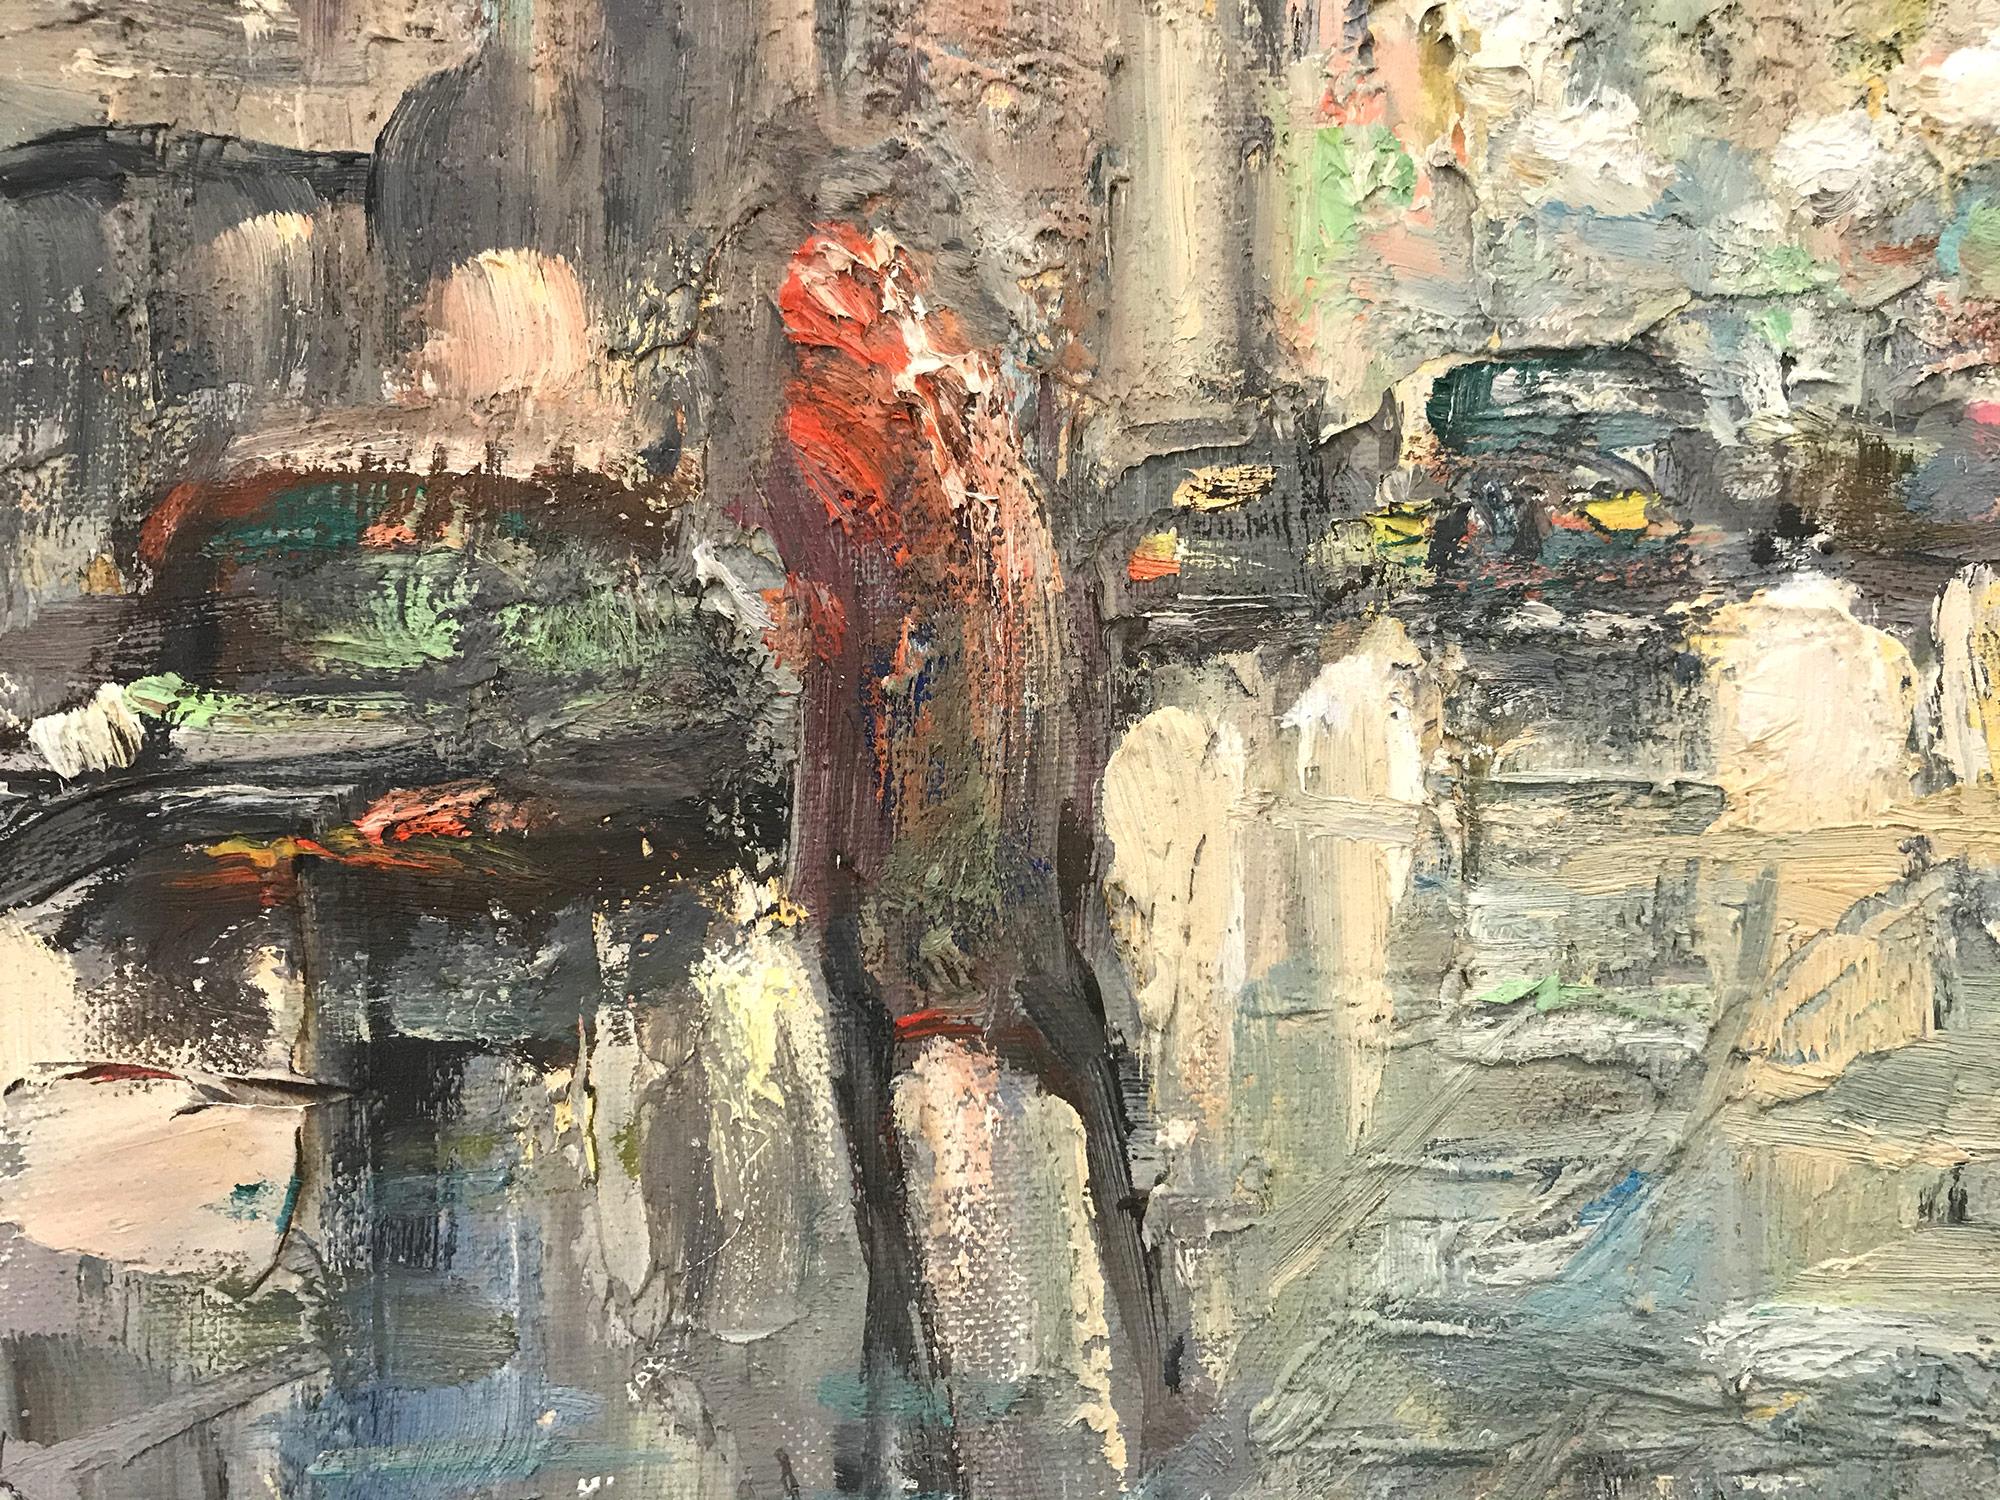 A charming depiction of New York City near Central Park, going down 5th Avenue on a chilly evening with city buildings captured in the distance. A cozy impressionistic scene with wonderful use of light and thick textured oil paint. This painting